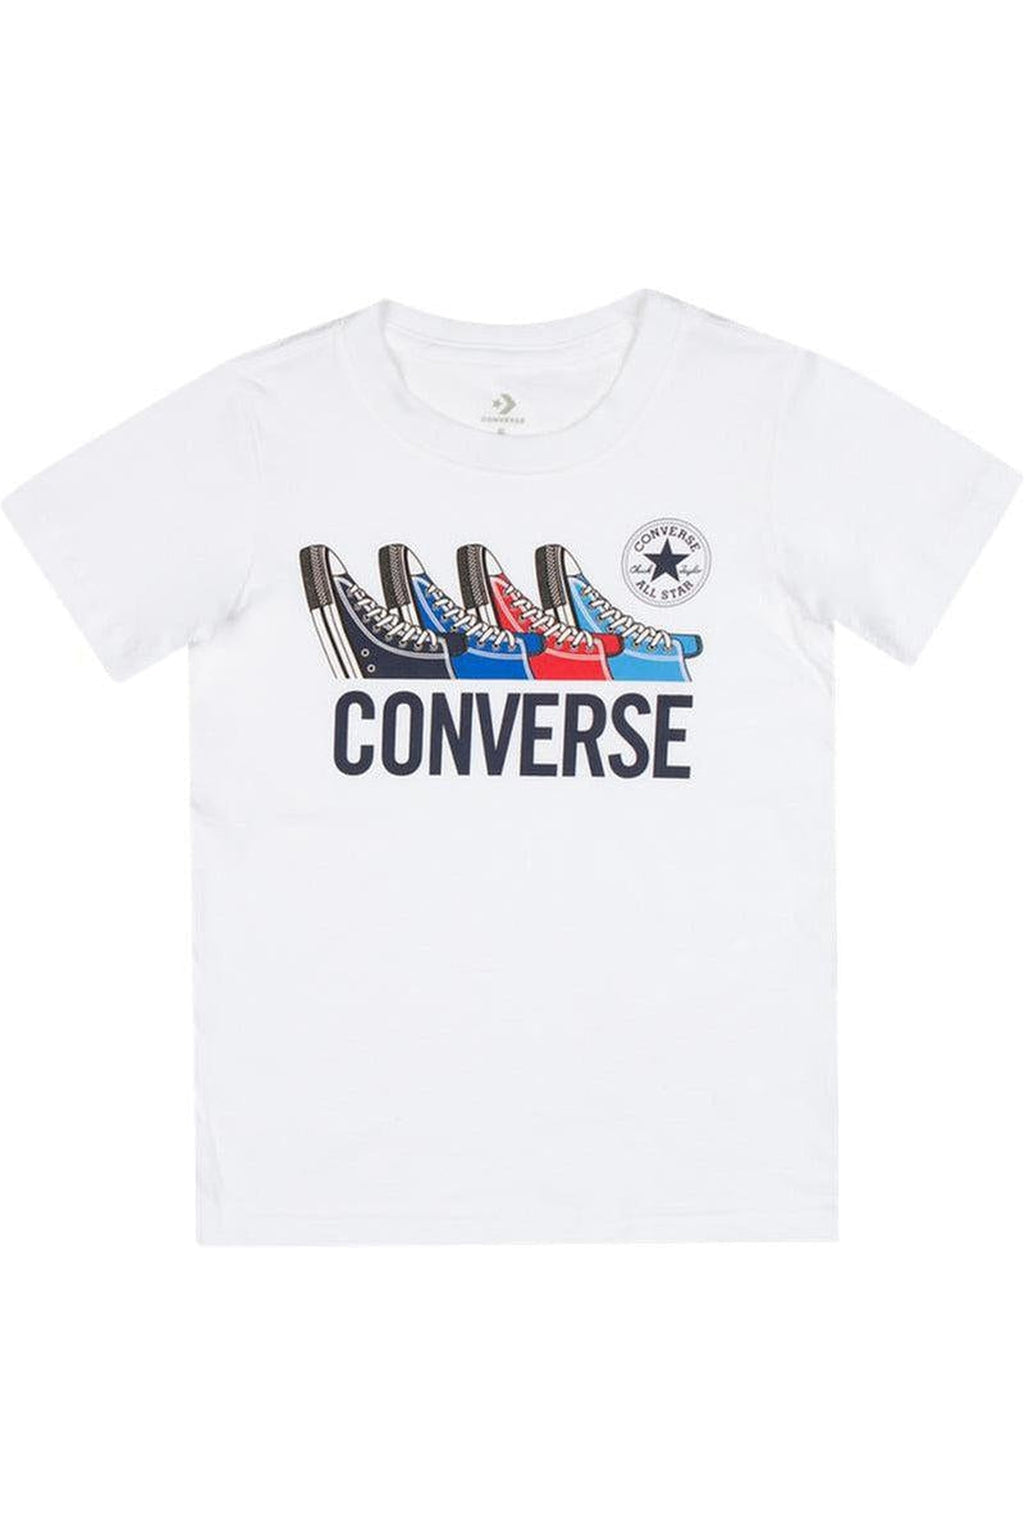 Converse KIDS White Shoe T-shirt| And Fly Sportswear – Fit & Fly